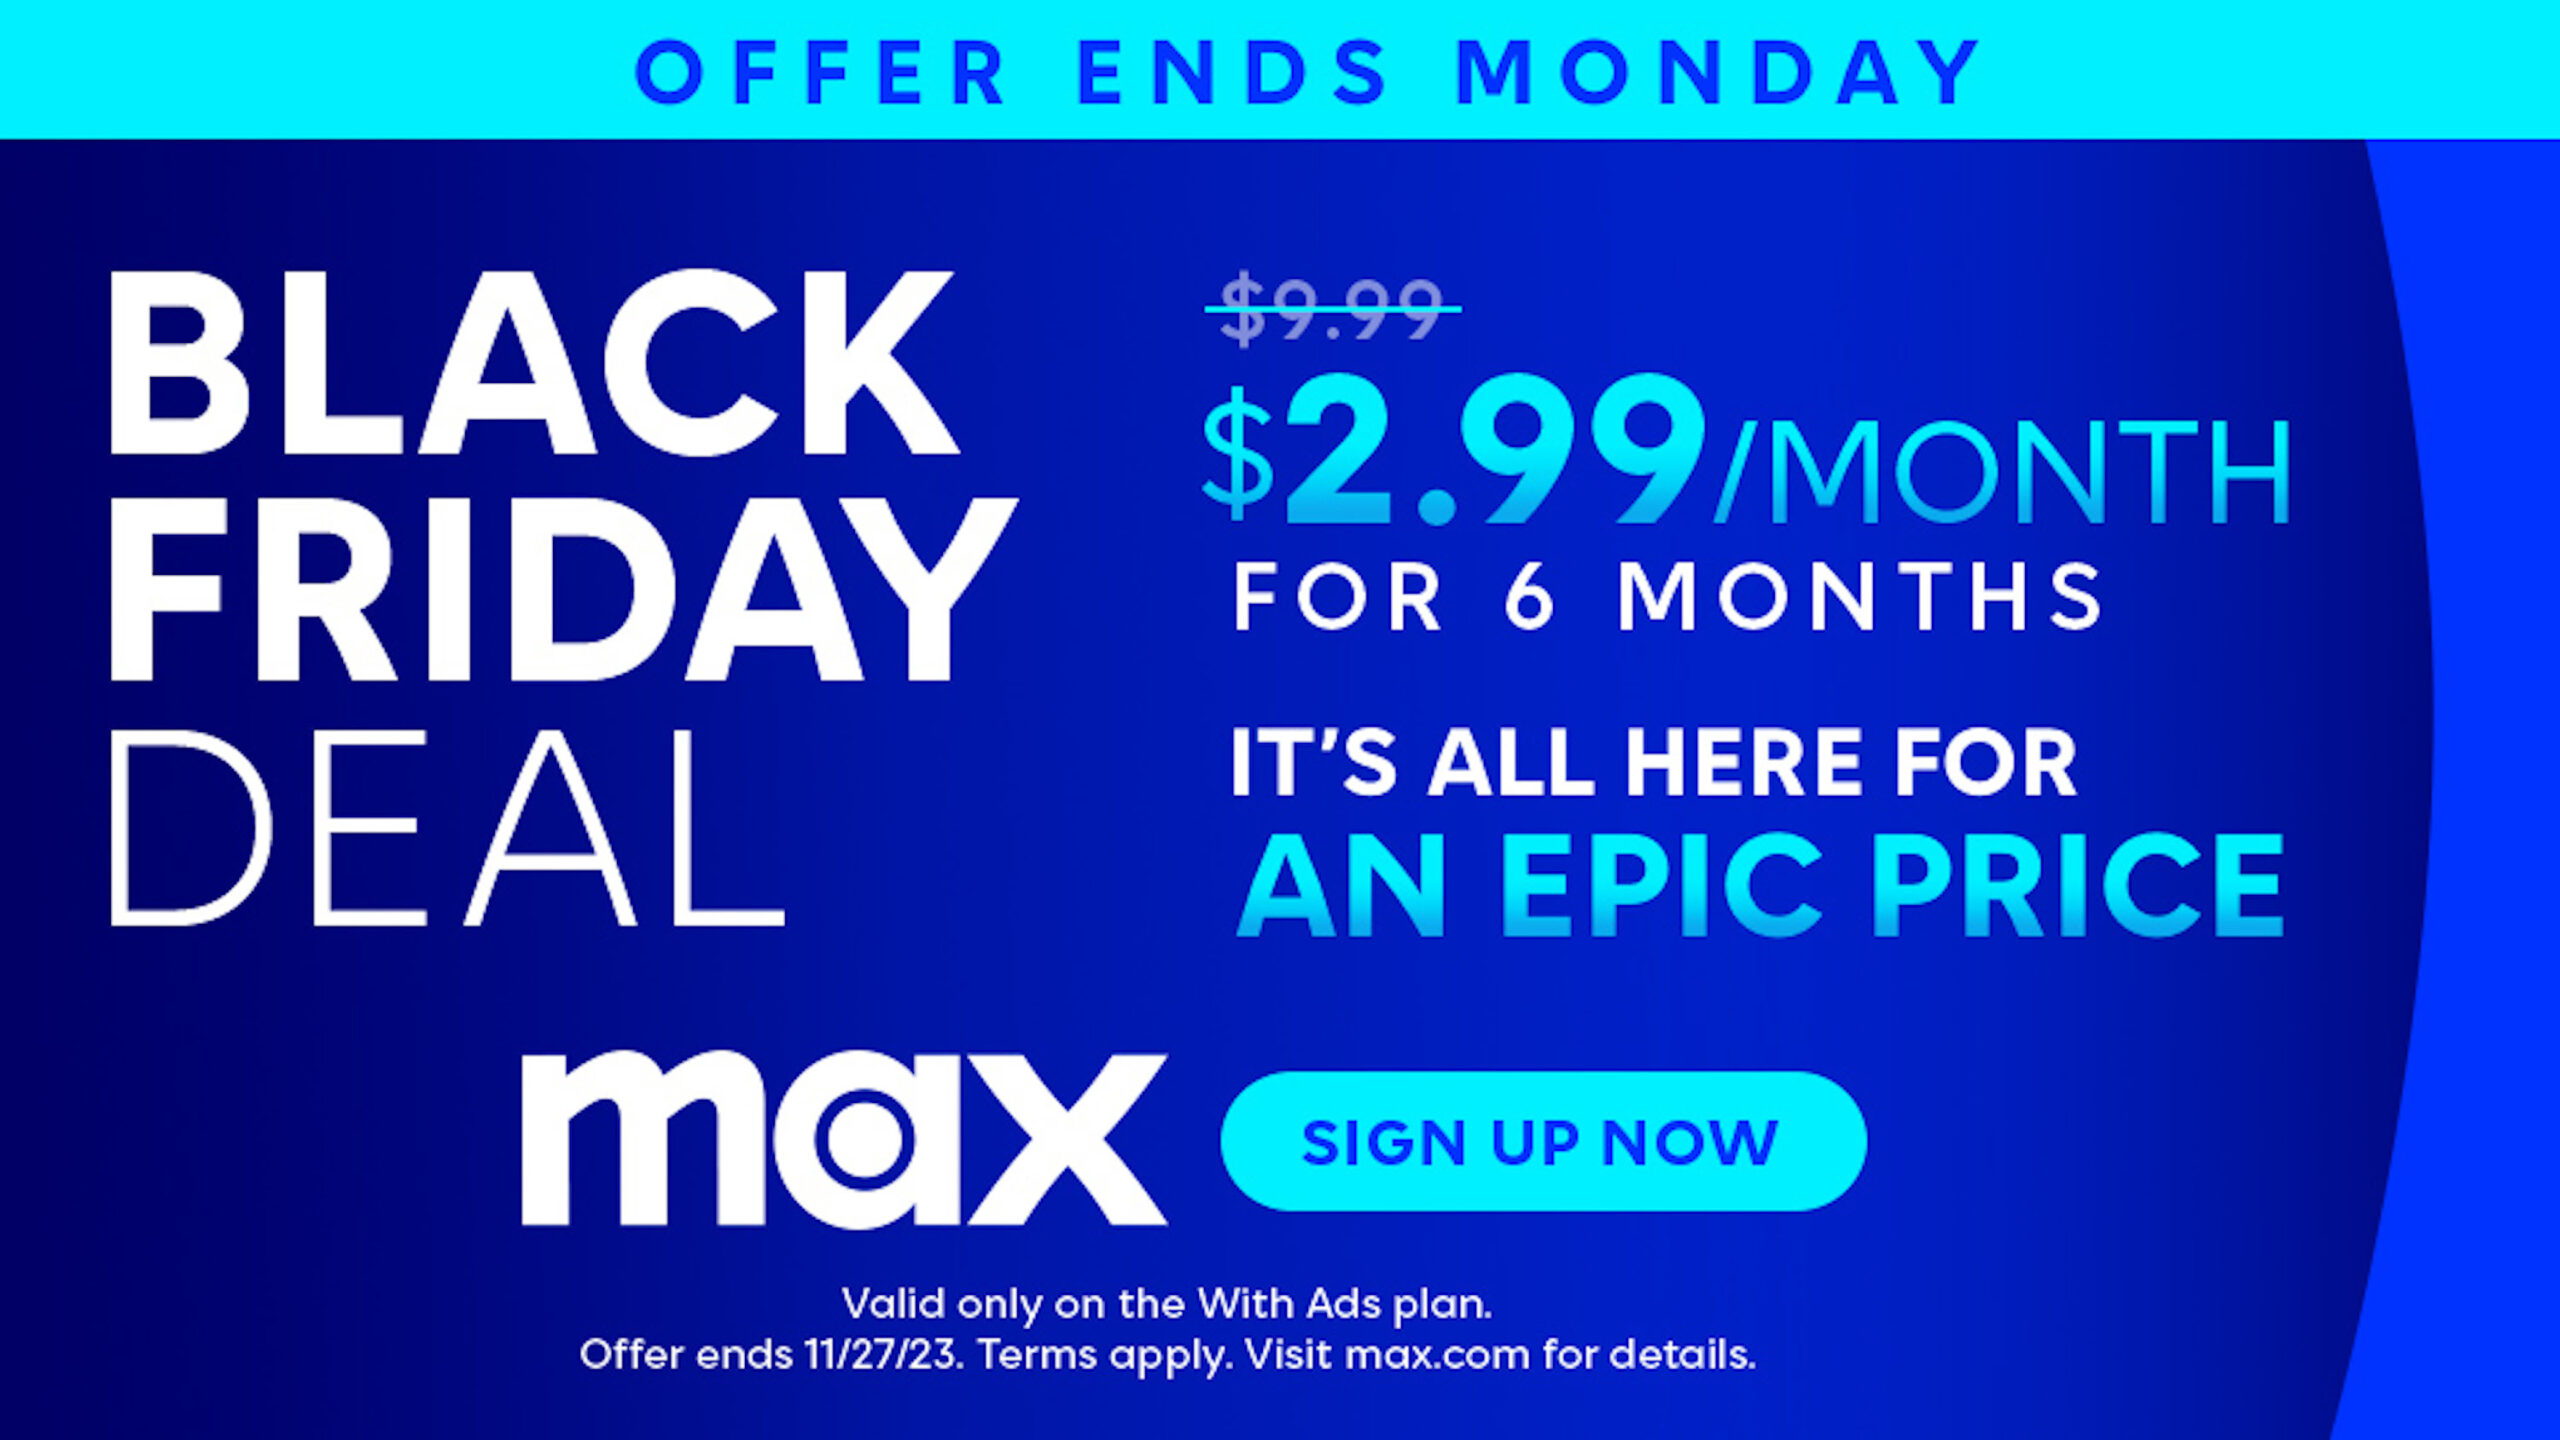 Max with ads is just $2.99 a month for Black Friday